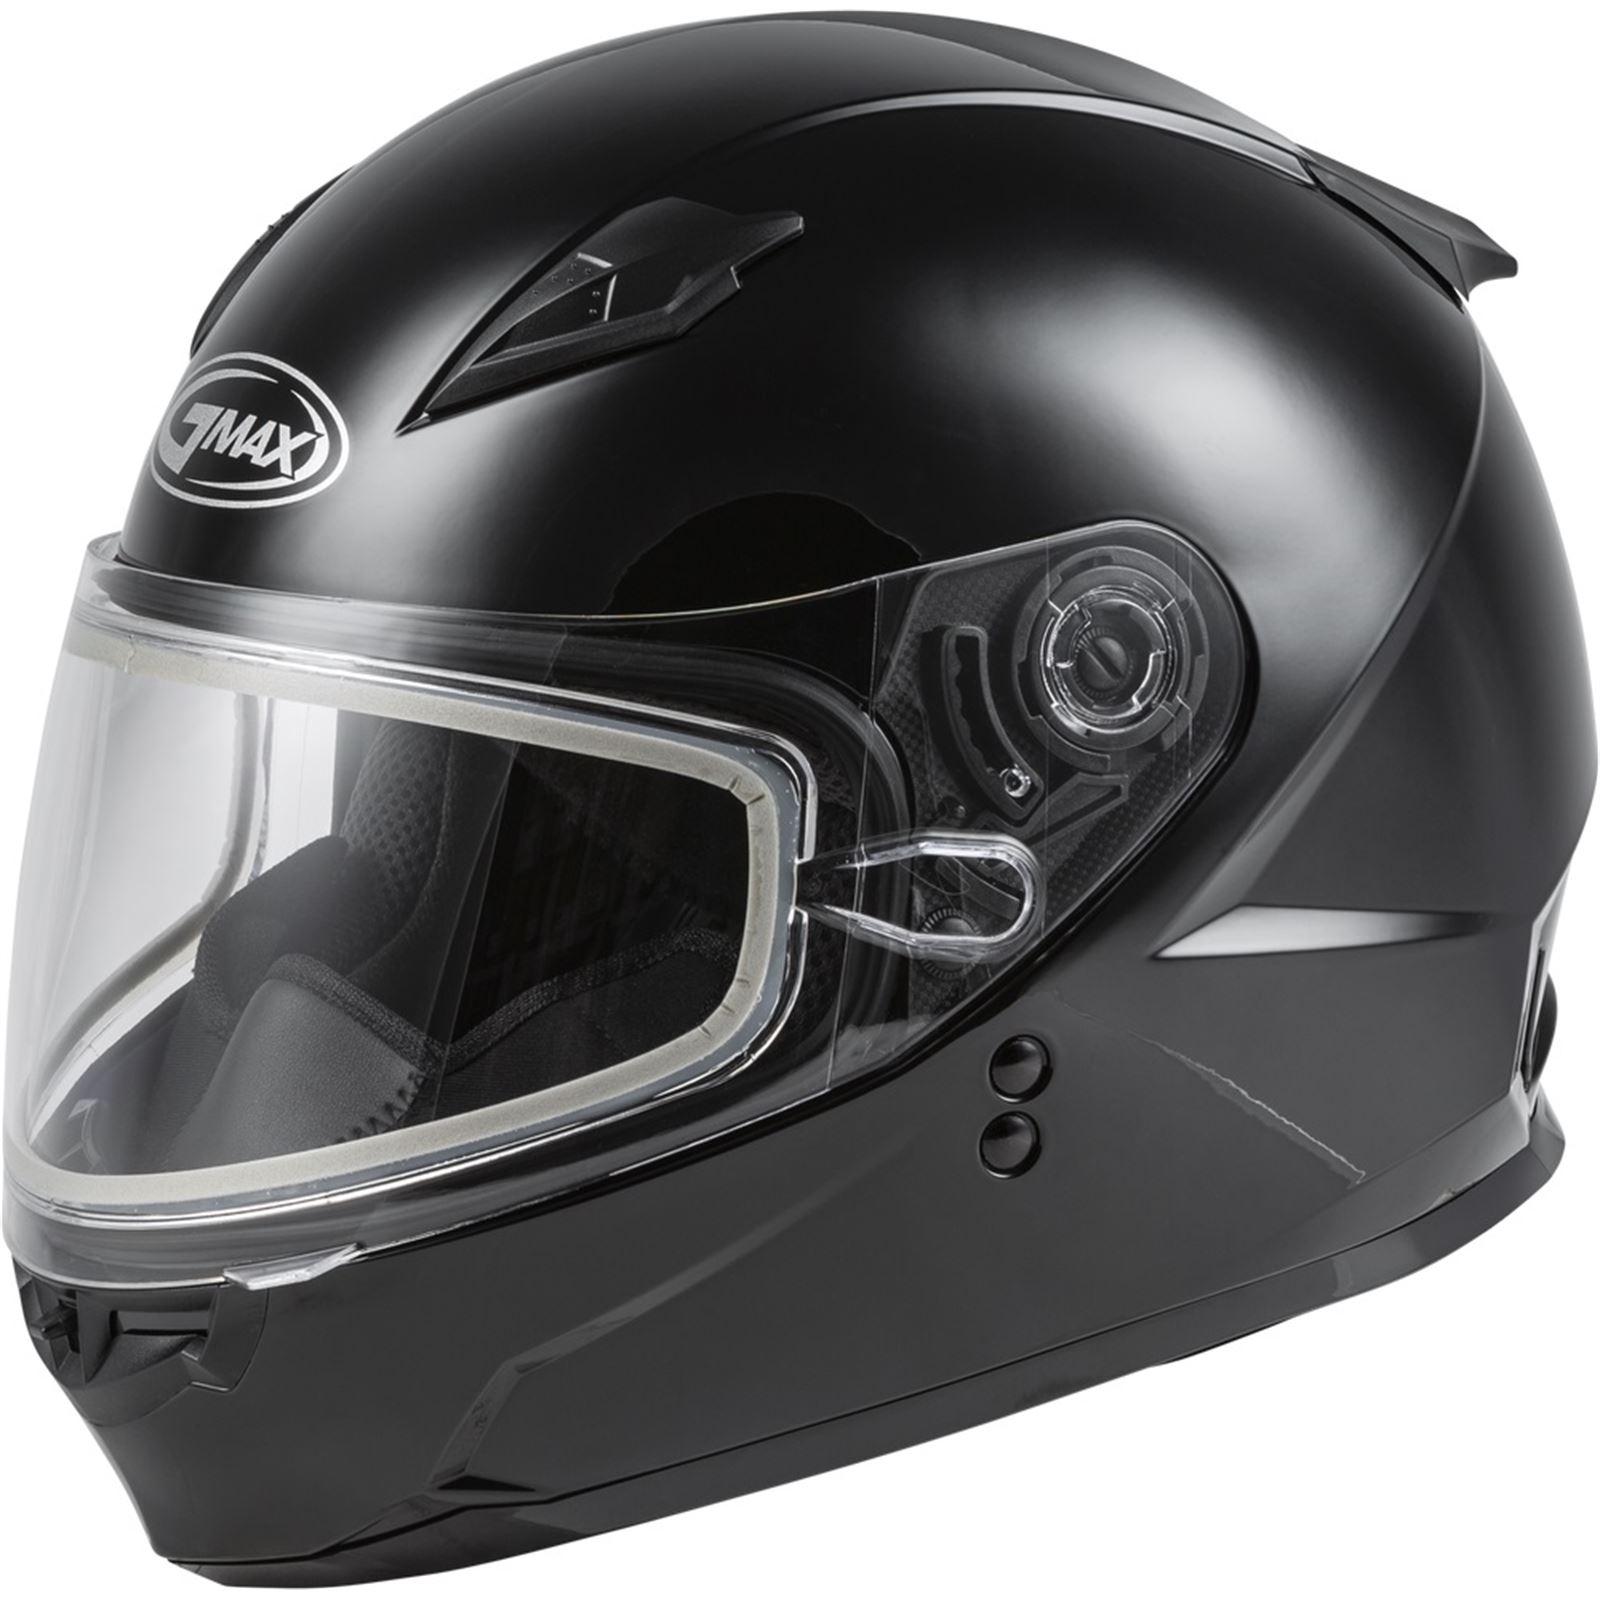 GMax Youth GM-49Y Full-Face Snow Helmet - Black - Youth Small